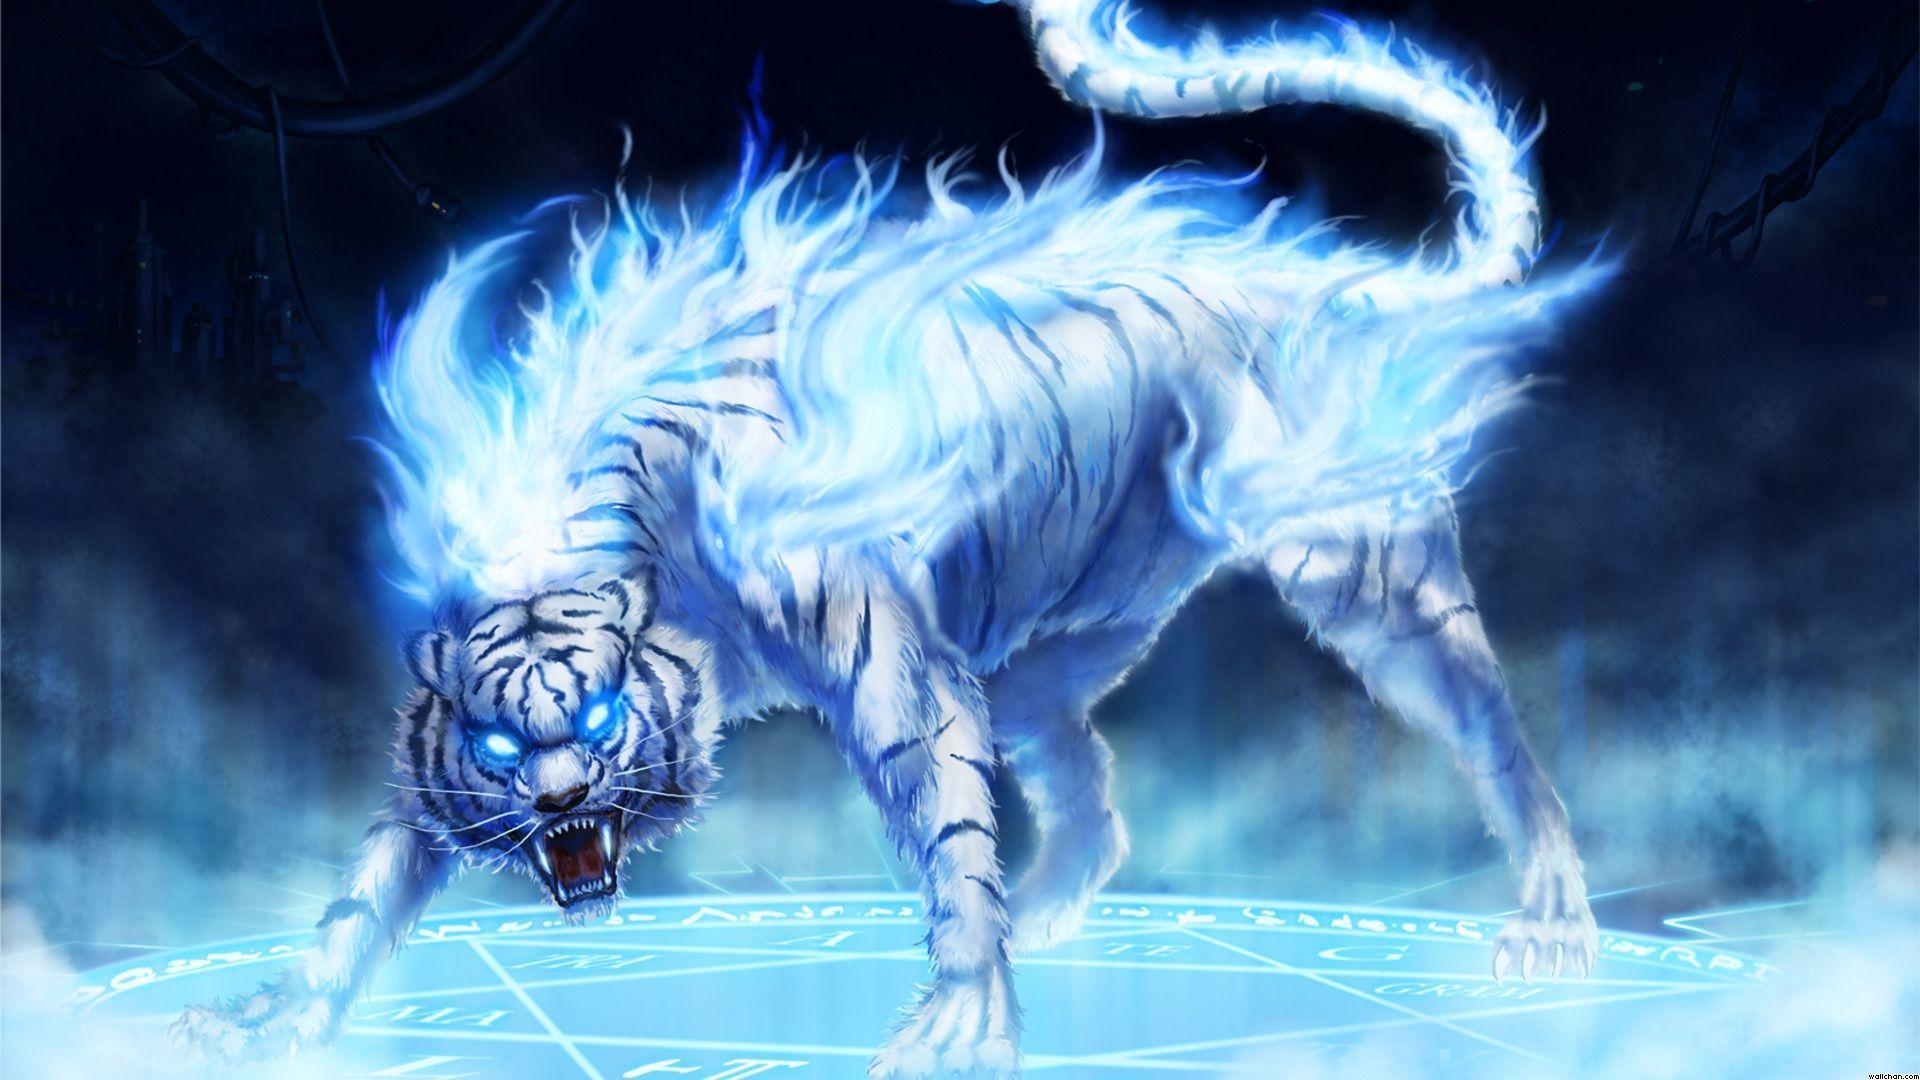 800x1280 White Tiger Fantasy Art Nexus 7Samsung Galaxy Tab 10Note Android  Tablets HD 4k Wallpapers Images Backgrounds Photos and Pictures